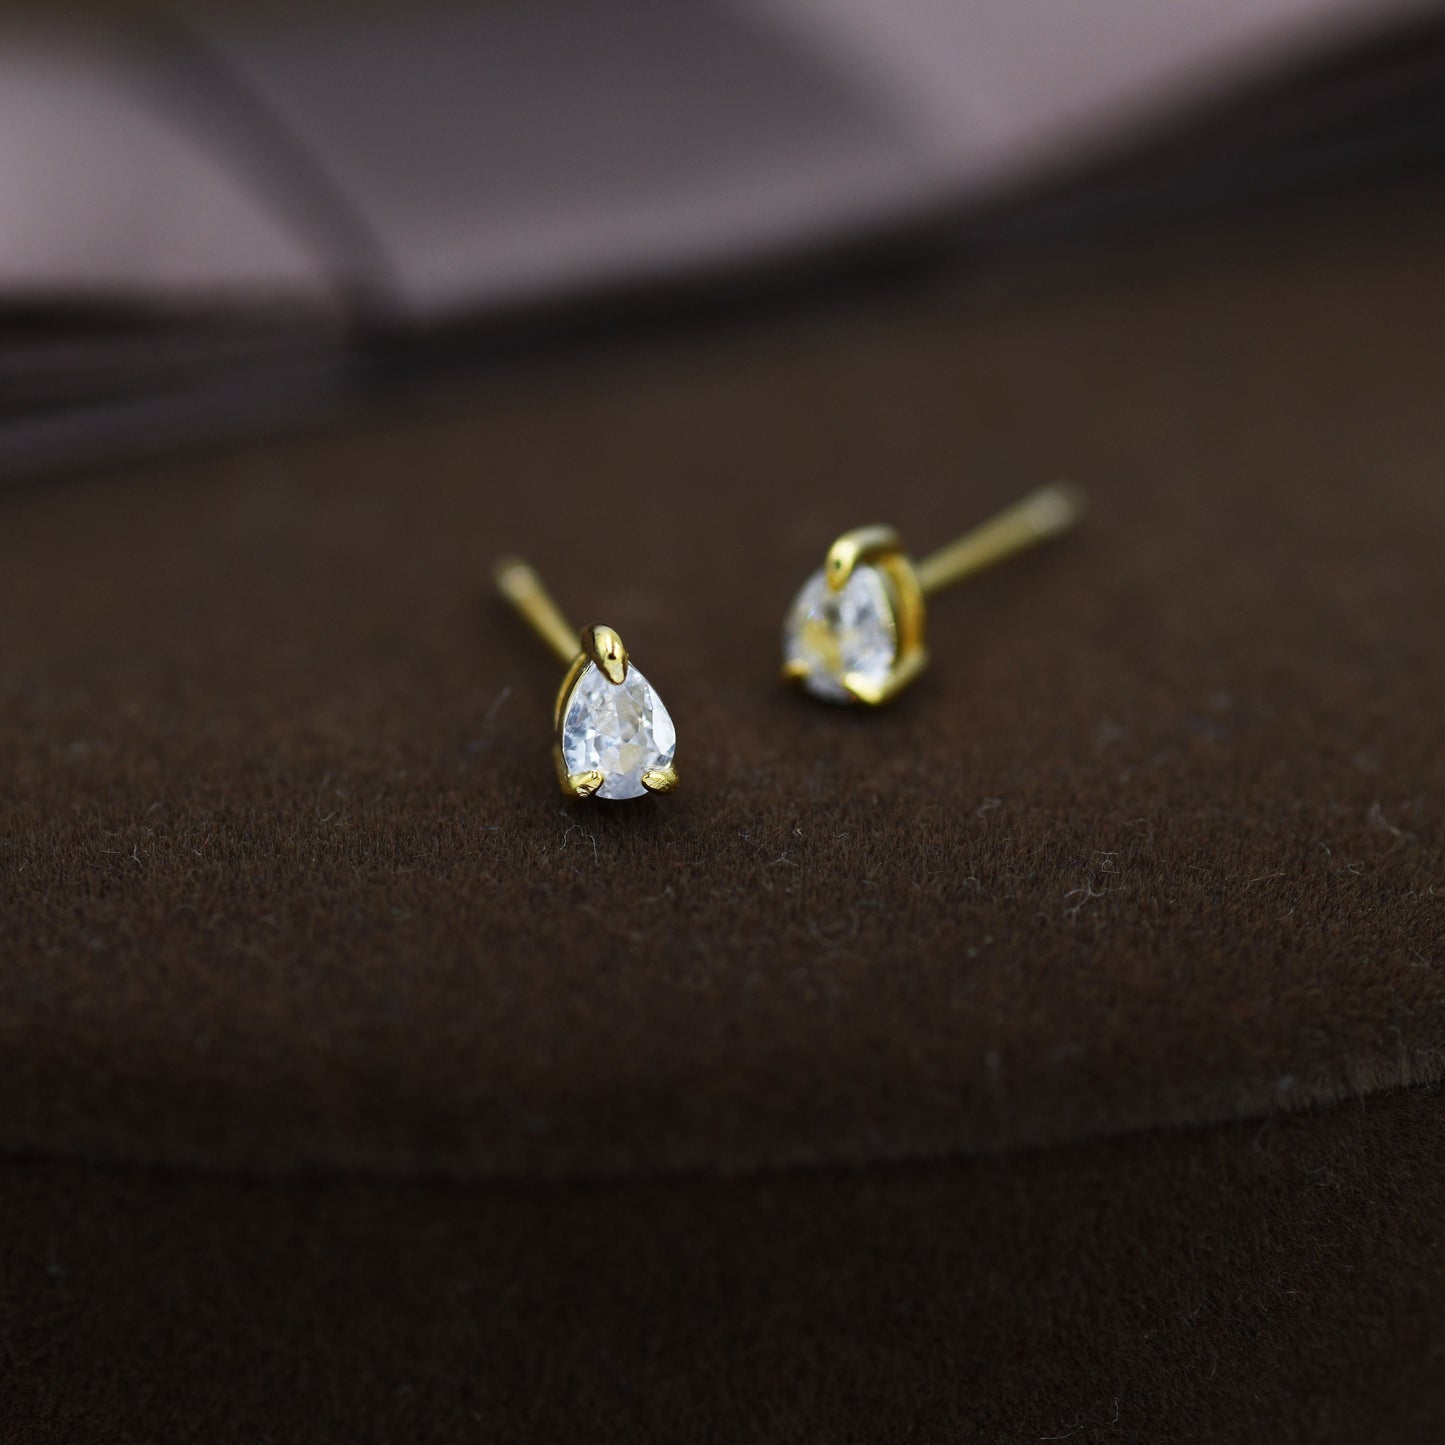 Extra Tiny Droplet CZ Stud Earrings in Sterling Silver, Tiny Pear Cut CZ Stud Earrings, Silver or Gold